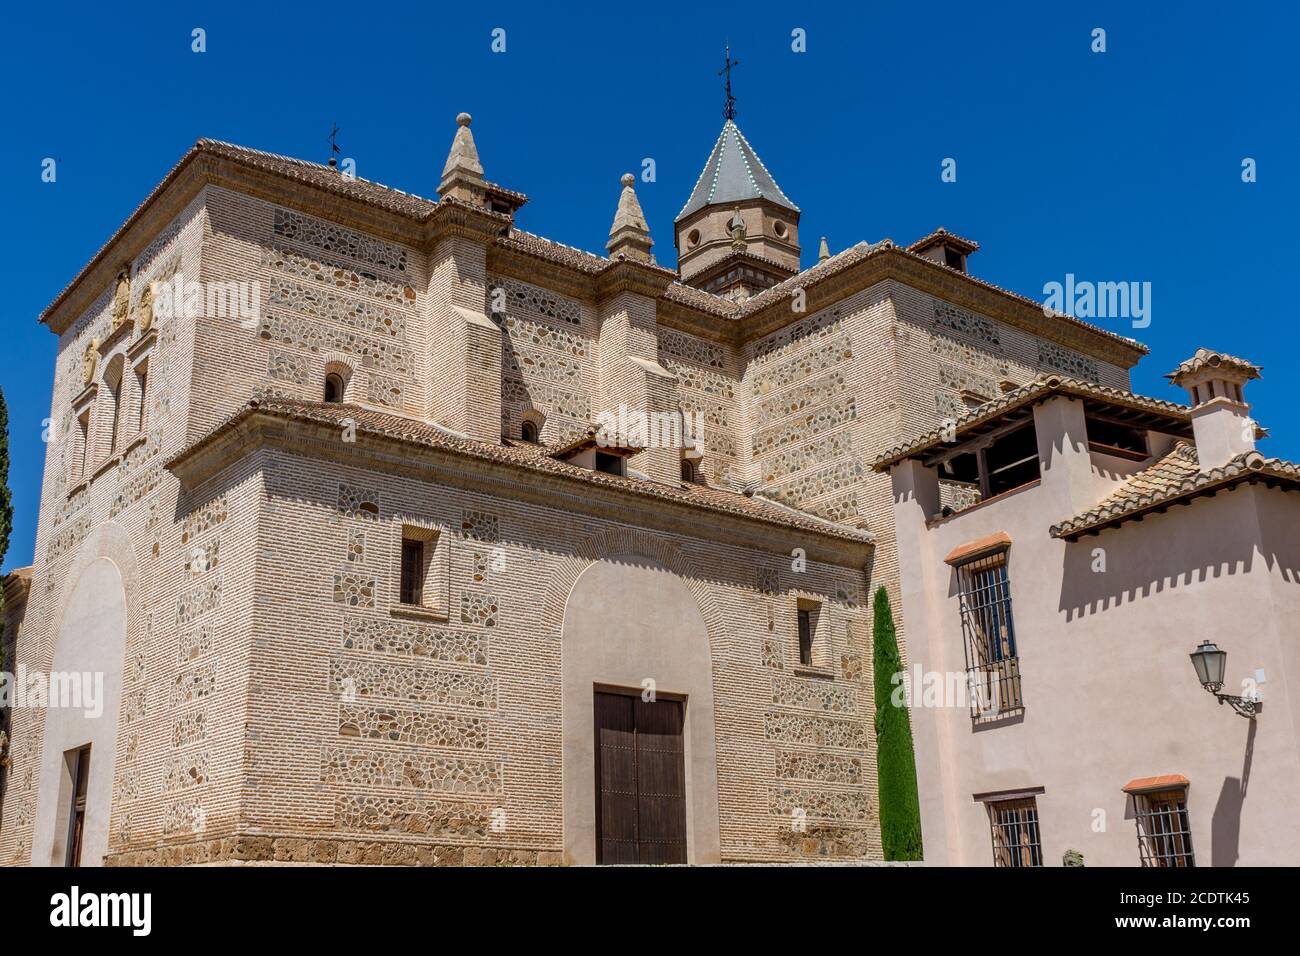 St. Mary Church of the Alhambra (Church of Santa Maria de la Alhambra) at the Alhambra Palace complex in Granada, Andalusia, Spa Stock Photo